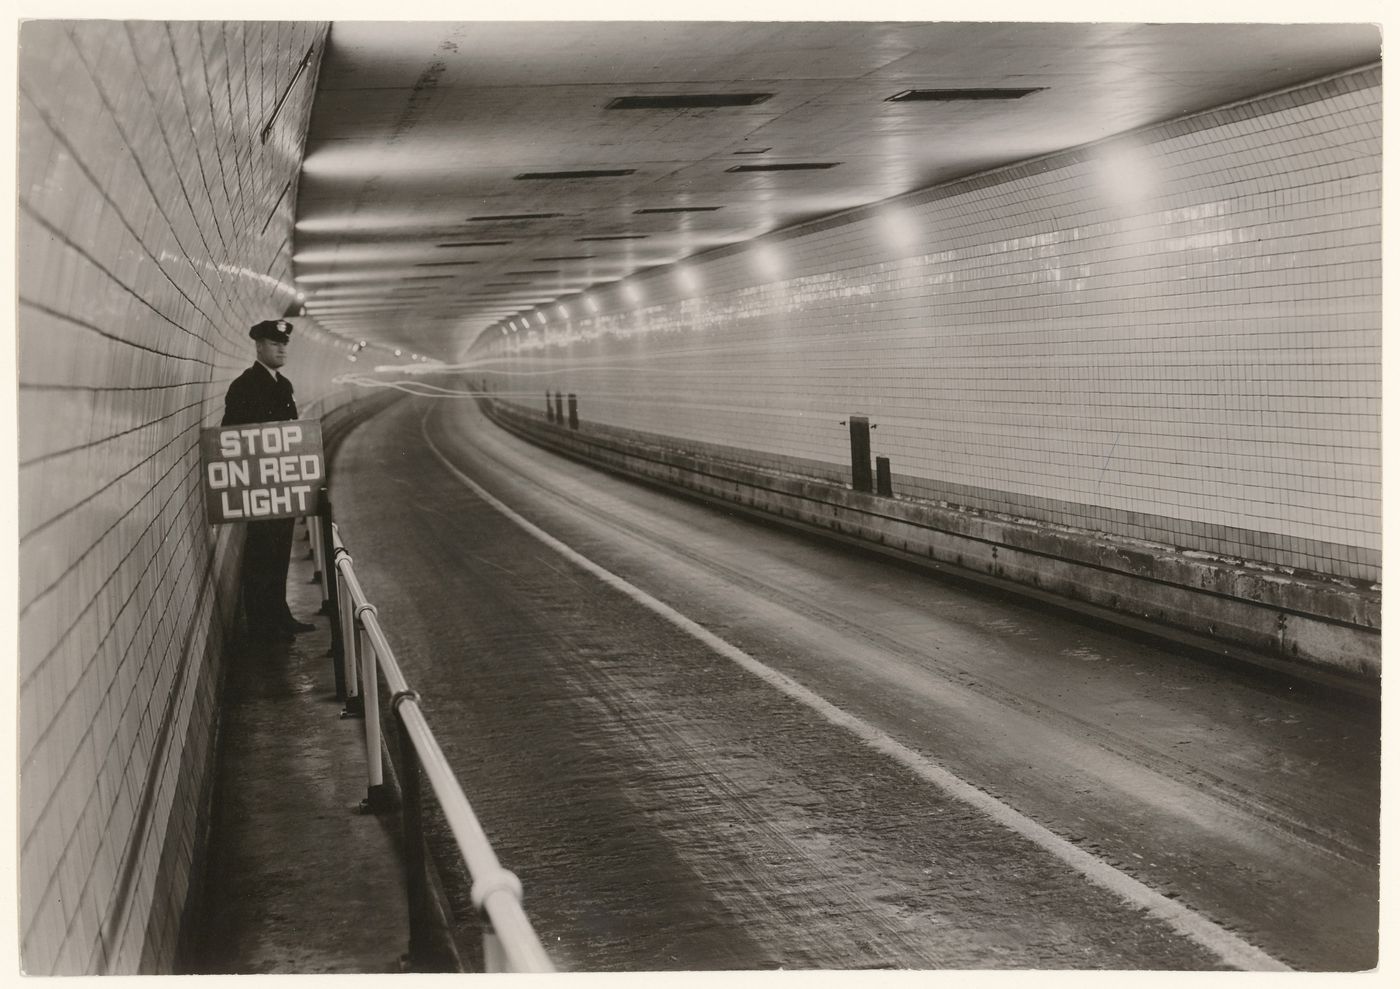 Holland Tunnel, interior view with guard on left holding stop sign, New York City, New York